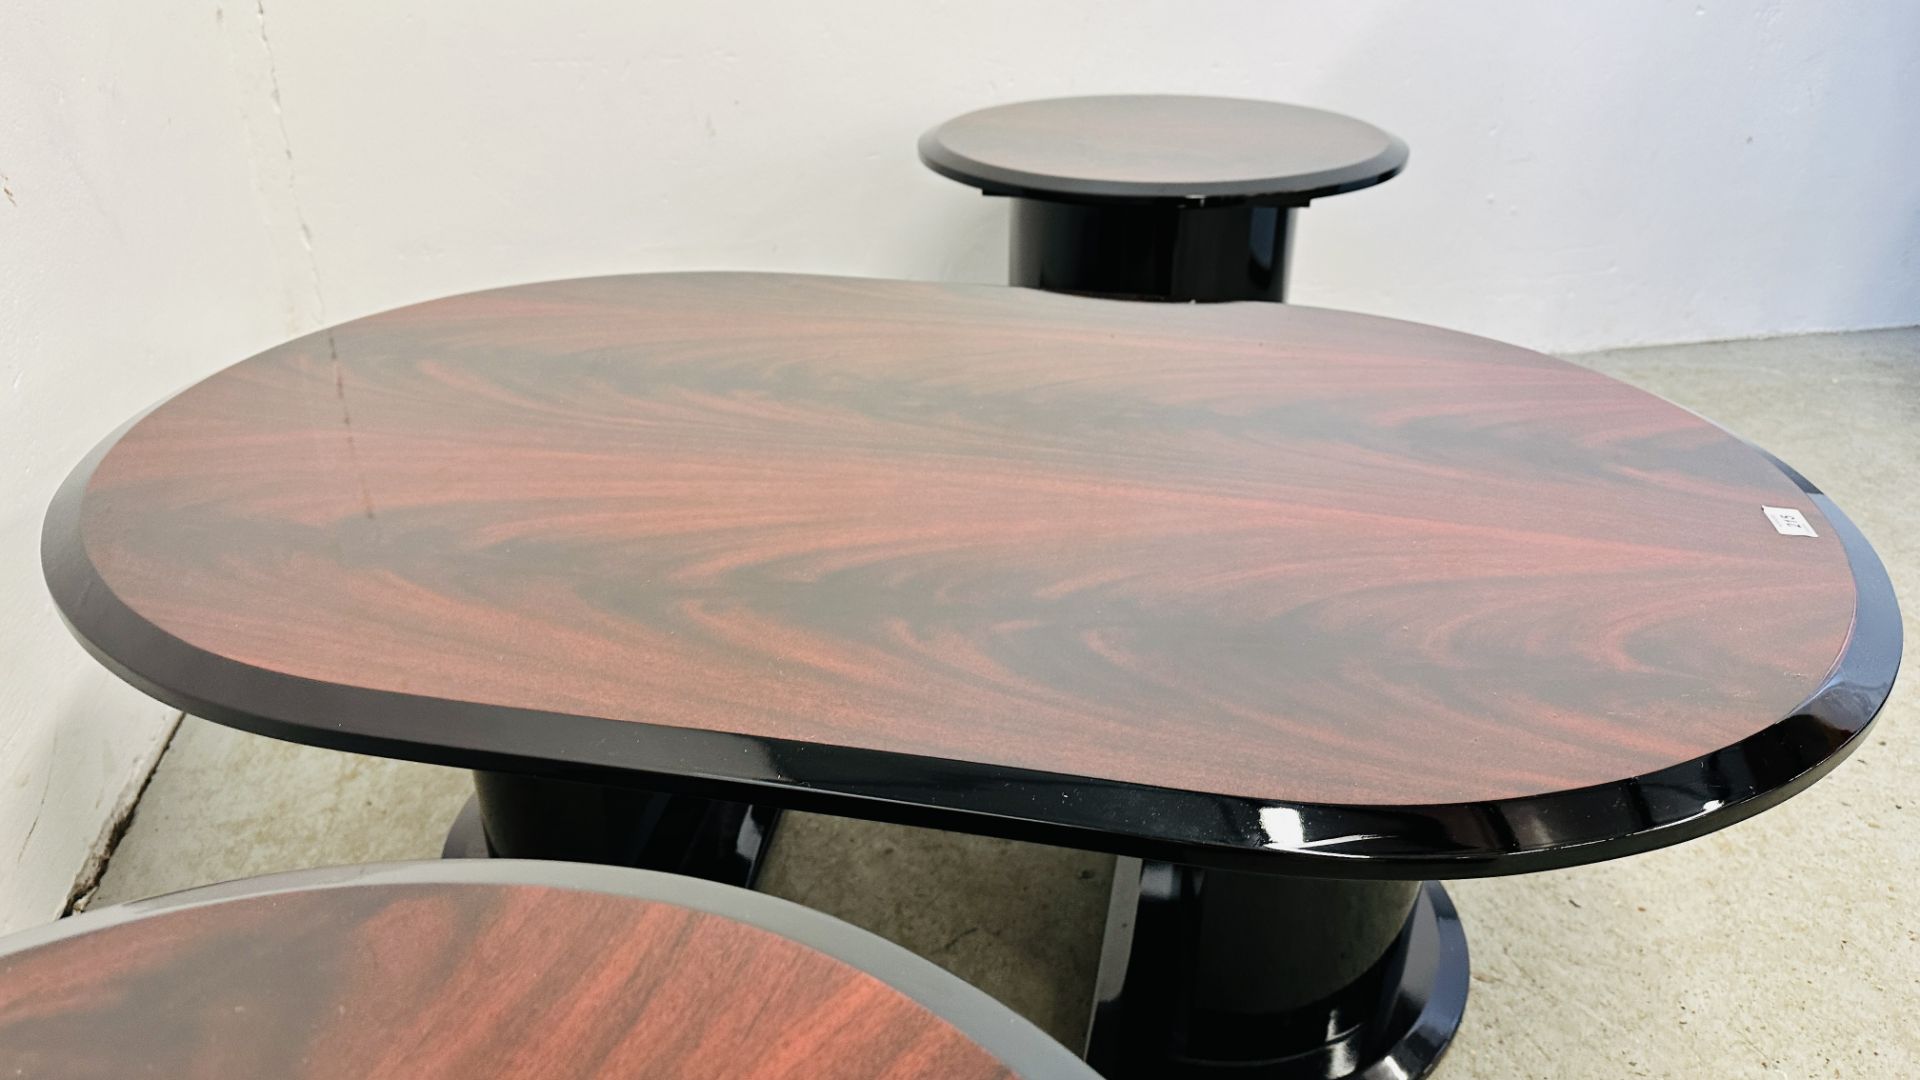 3 MATCHING DESIGN HIGH GLOSS MAHOGANY FINISH COFFEE TABLES INCLUDING A PAIR OF CIRCULAR AND 1 OVAL. - Image 8 of 16